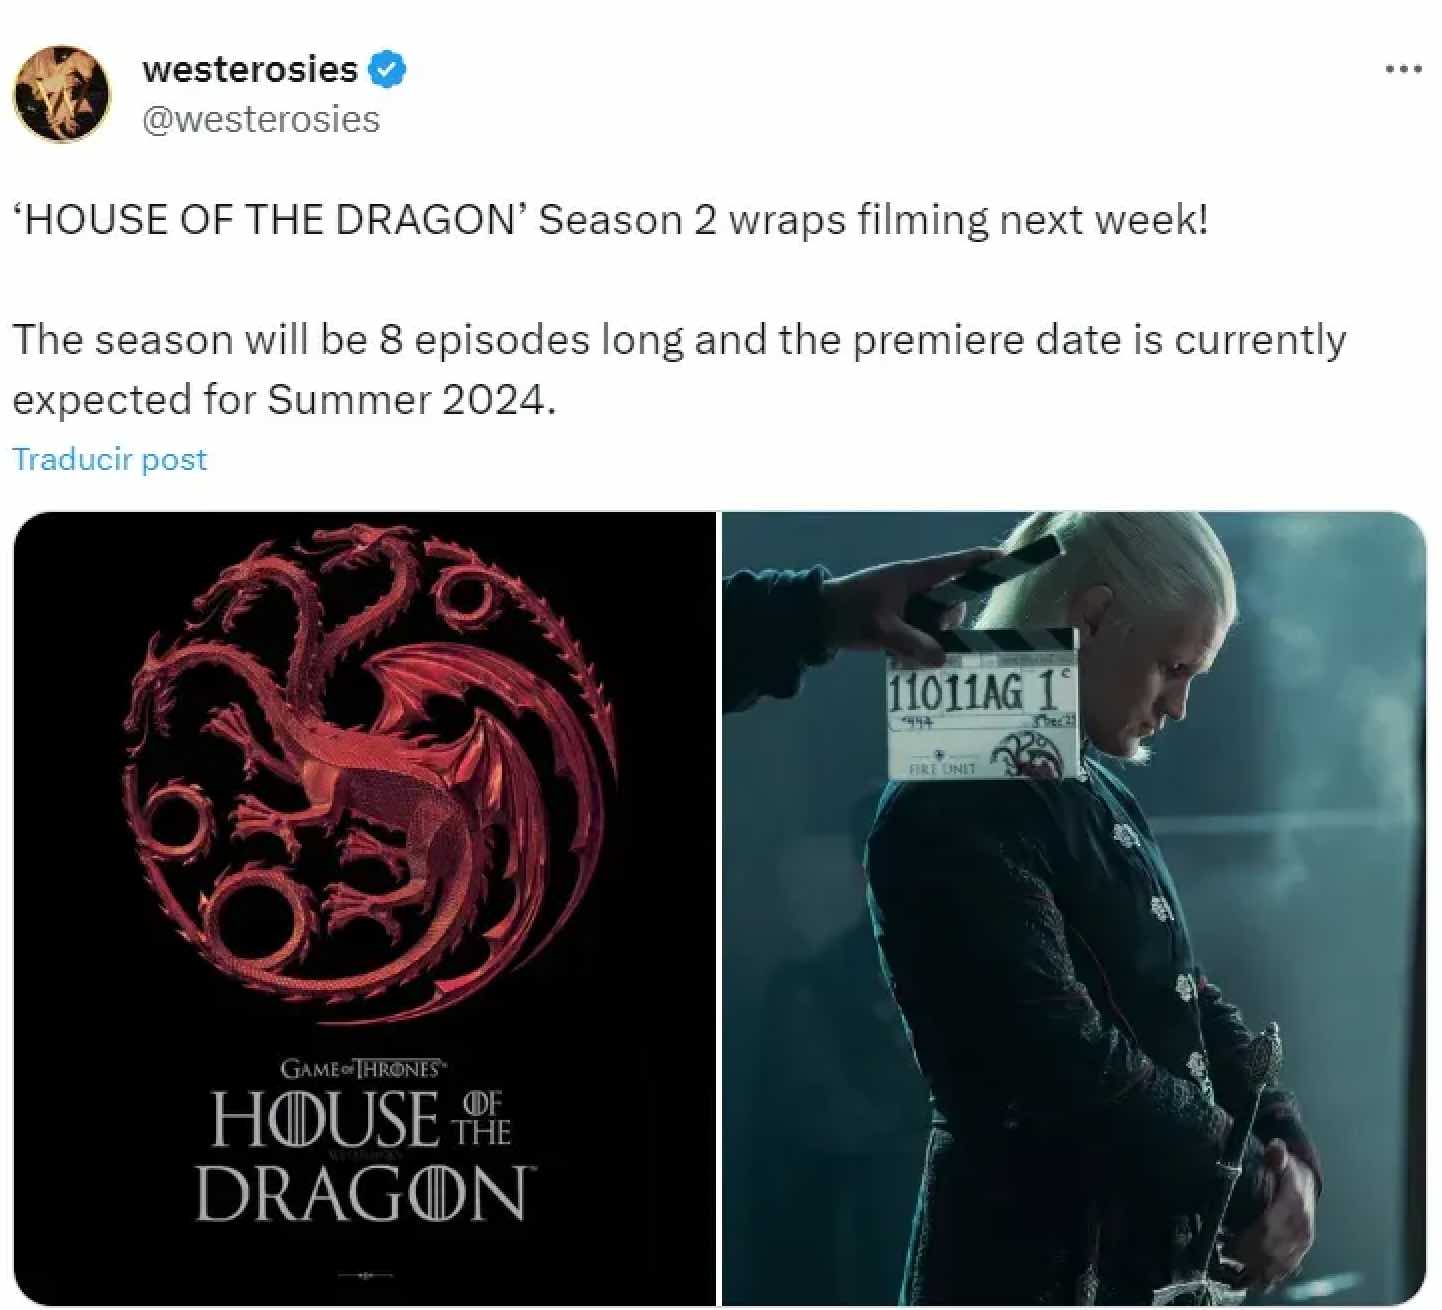 House of the Dragon' Season 2 Will Debut in Summer 2024